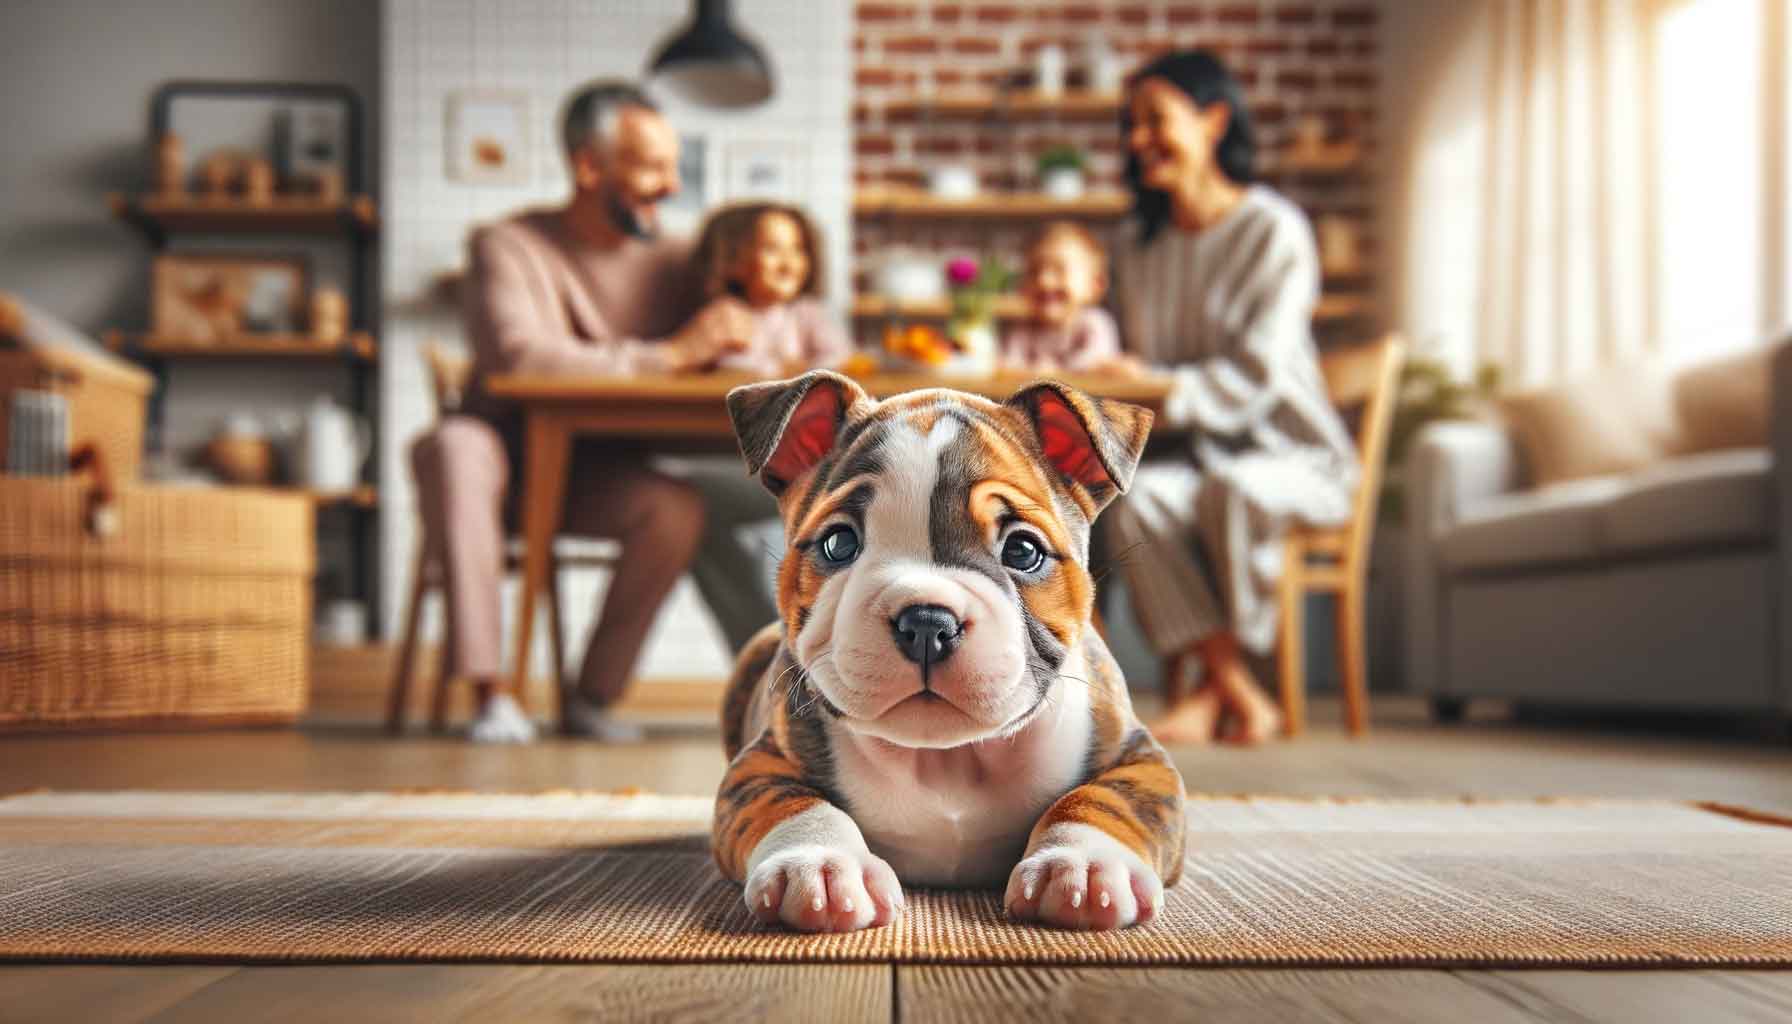 A photograph of a Micro bully x english bulldog in a family home setting, displaying a variety of coat colors. The puppy appears playful and healthy, showcasing its small size and friendly demeanor.